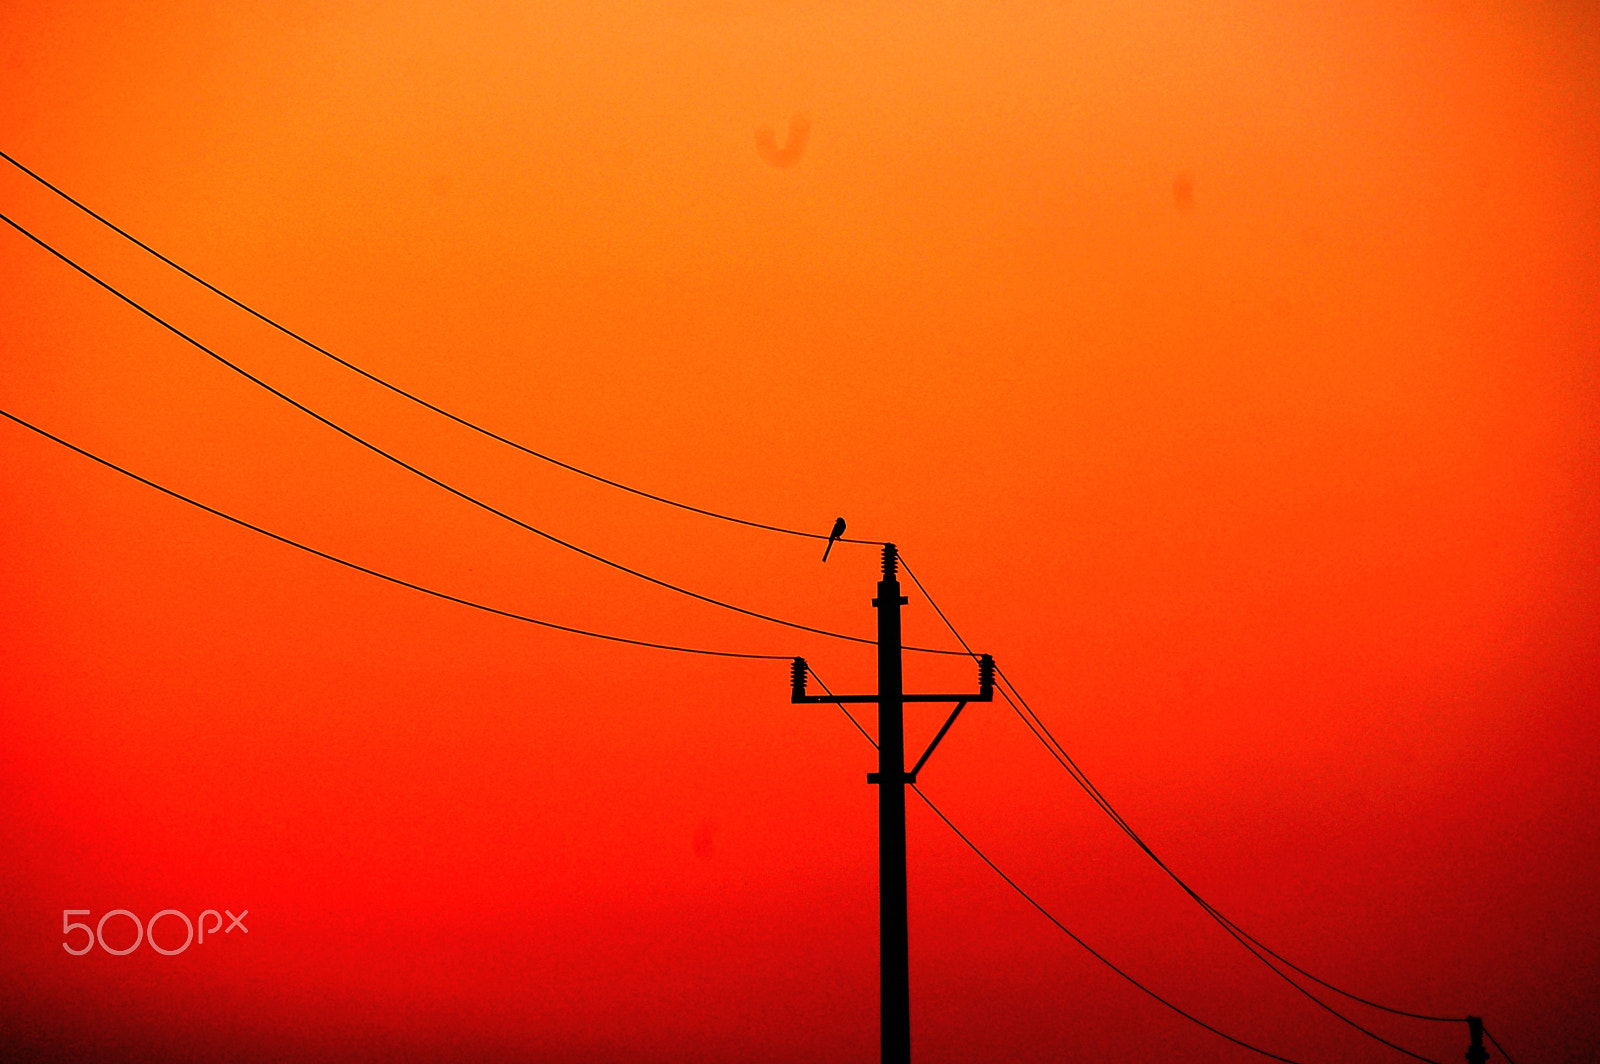 Nikon D50 sample photo. The birds in the sunset photography